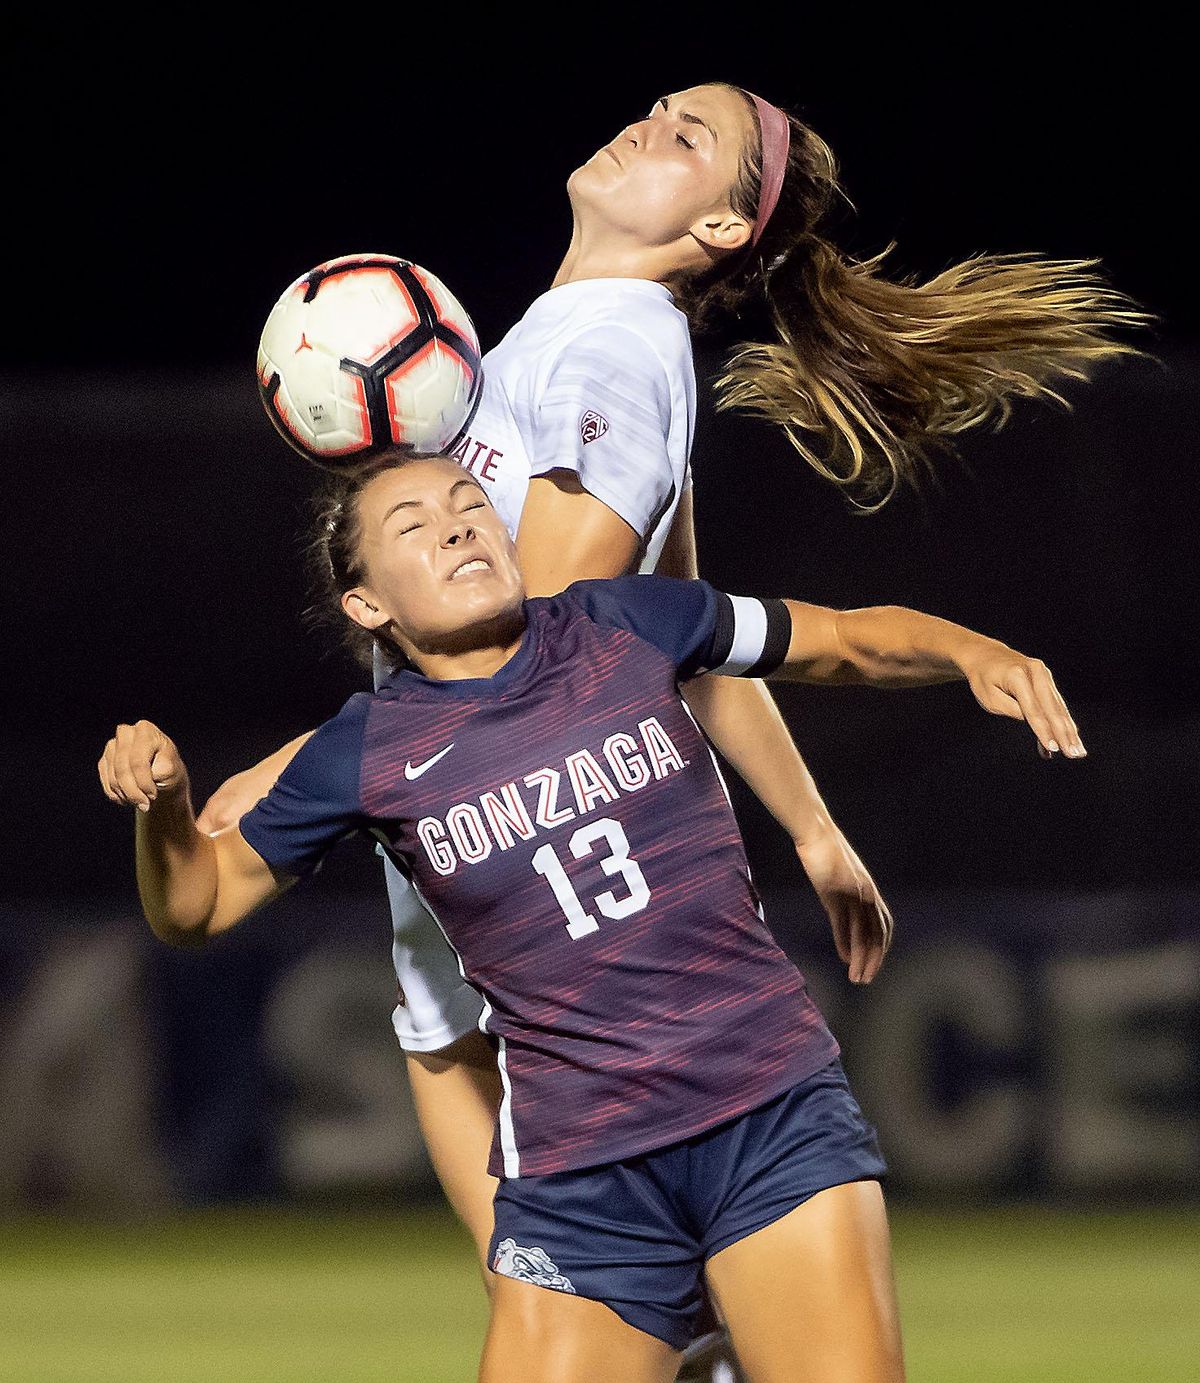 Gonzaga forward Madeline Gotta (13) heads the ball as WSU midfielder Averie Collins defends, Thurs., Sept. 5, 2019, at Gonzaga University. (Colin Mulvany / The Spokesman-Review)